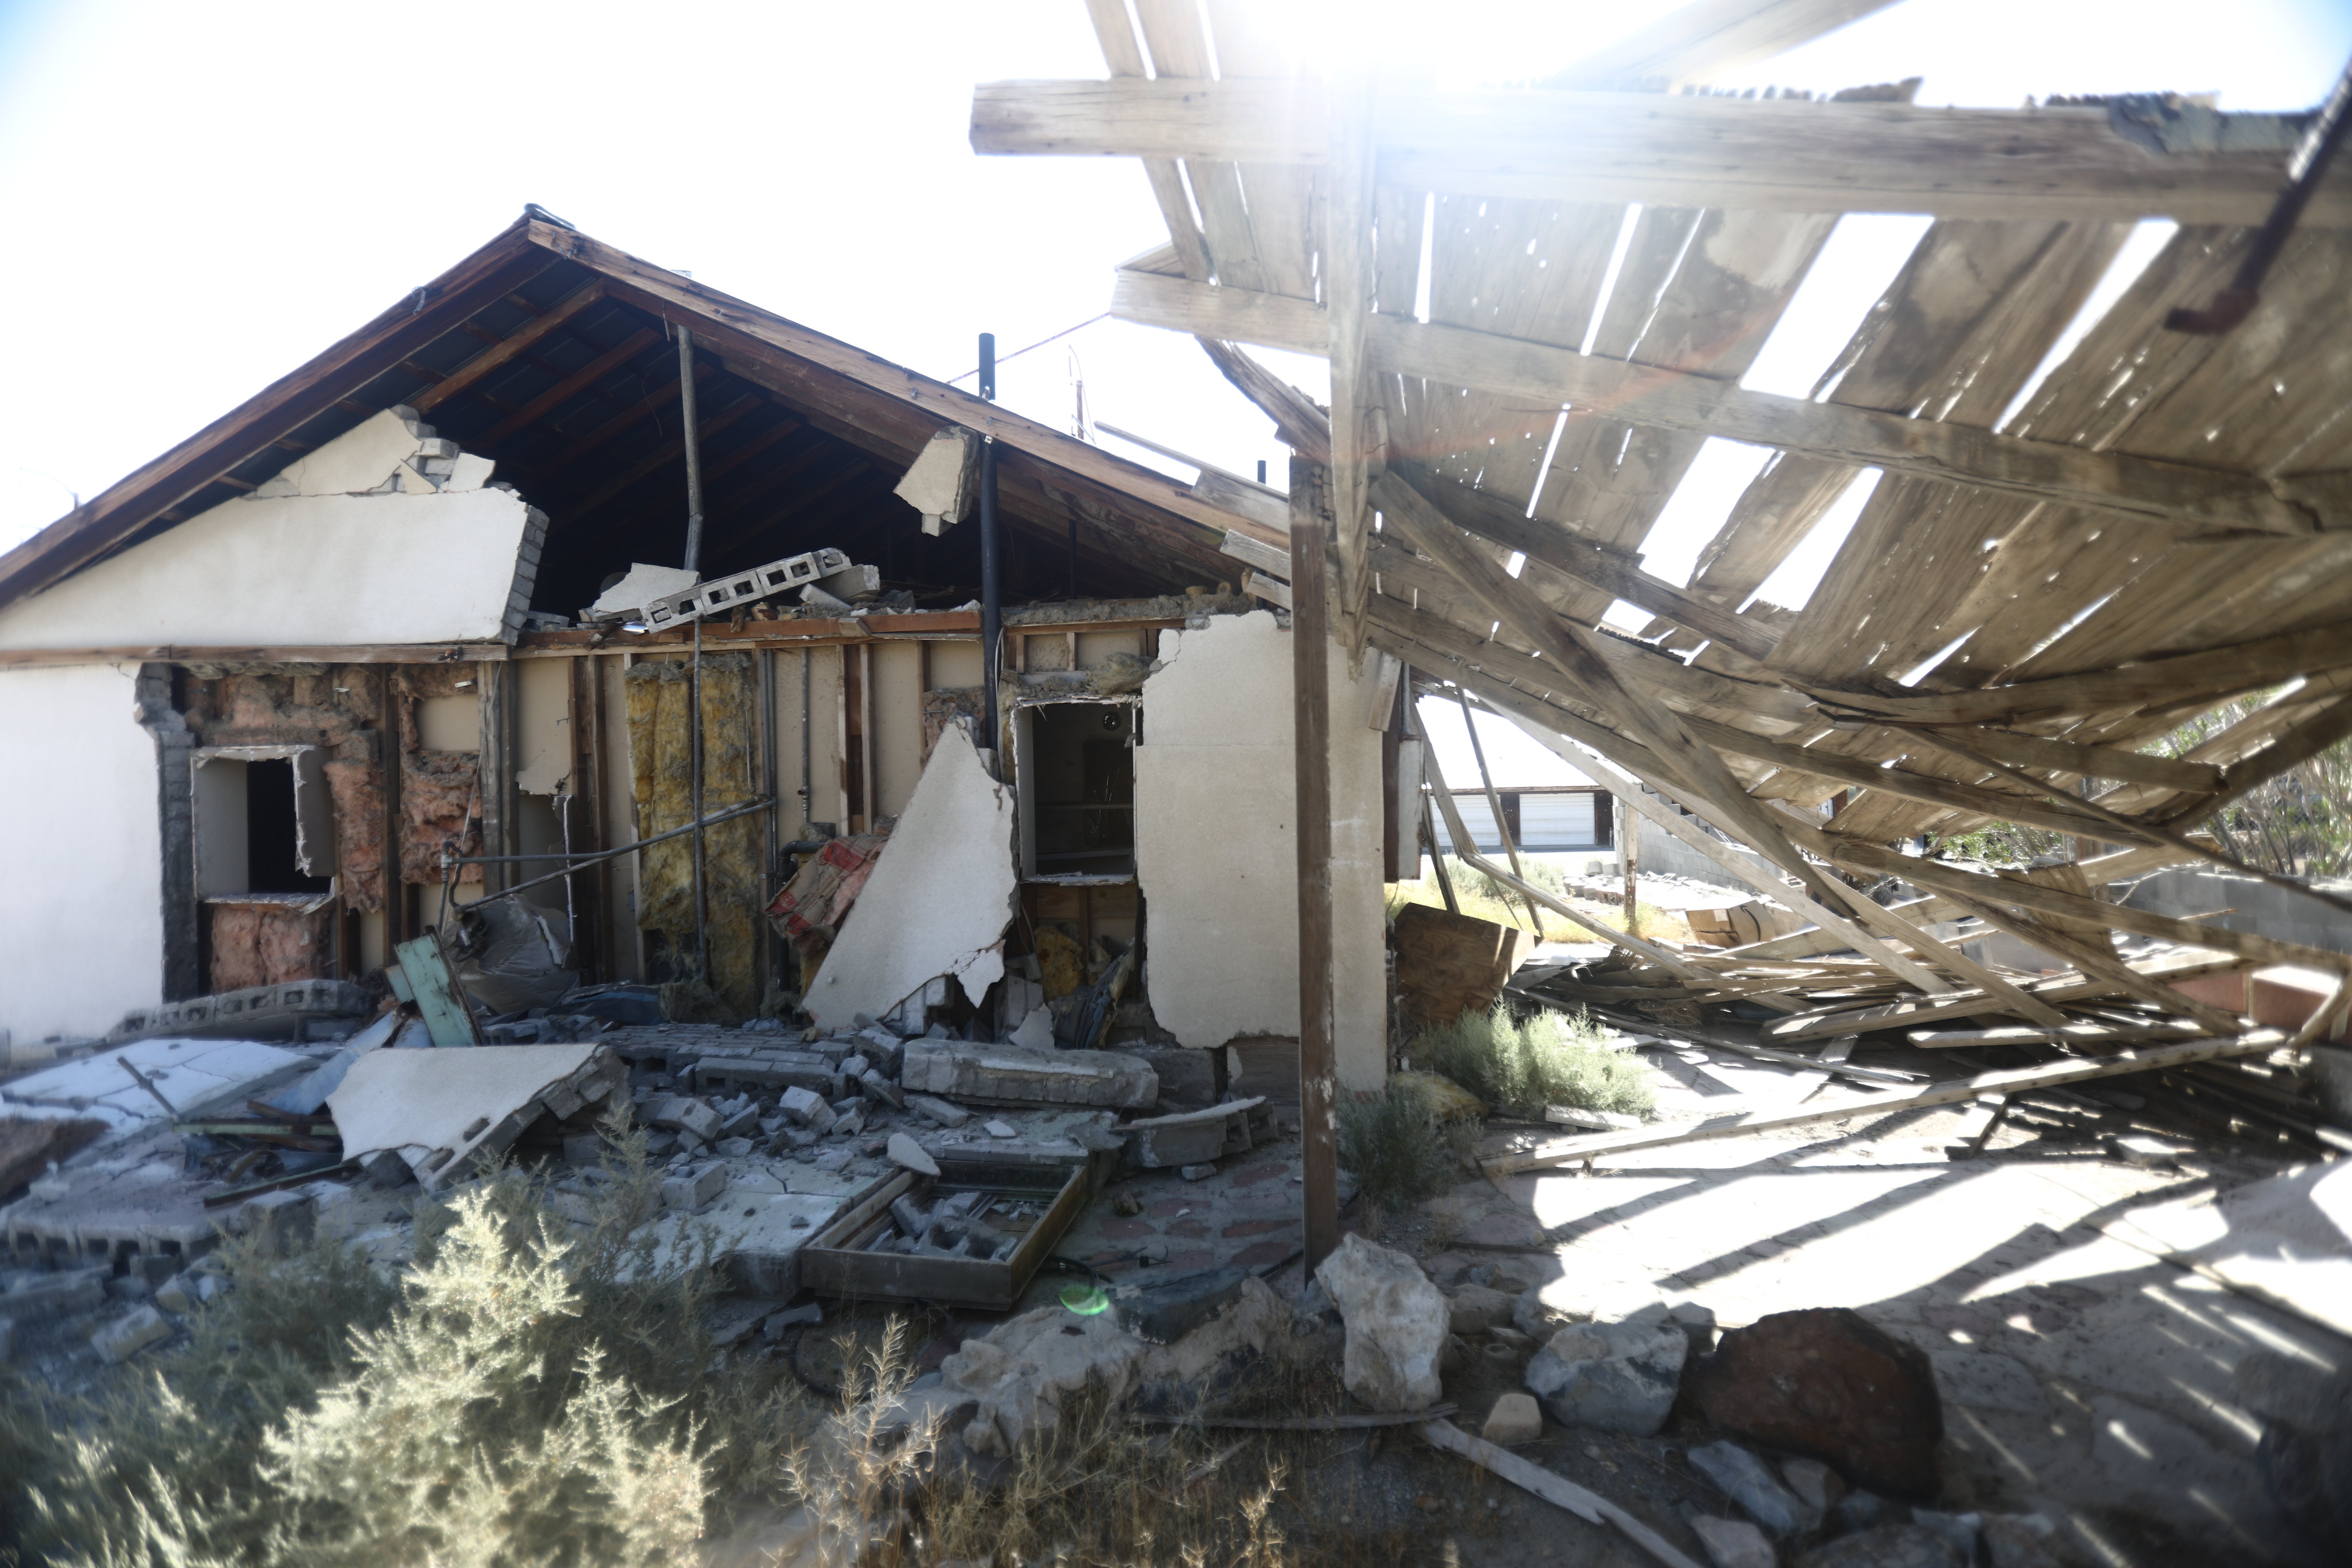 A house damaged by the 7.1 magnitude earthquake in Trona, California | Photo: Getty Images